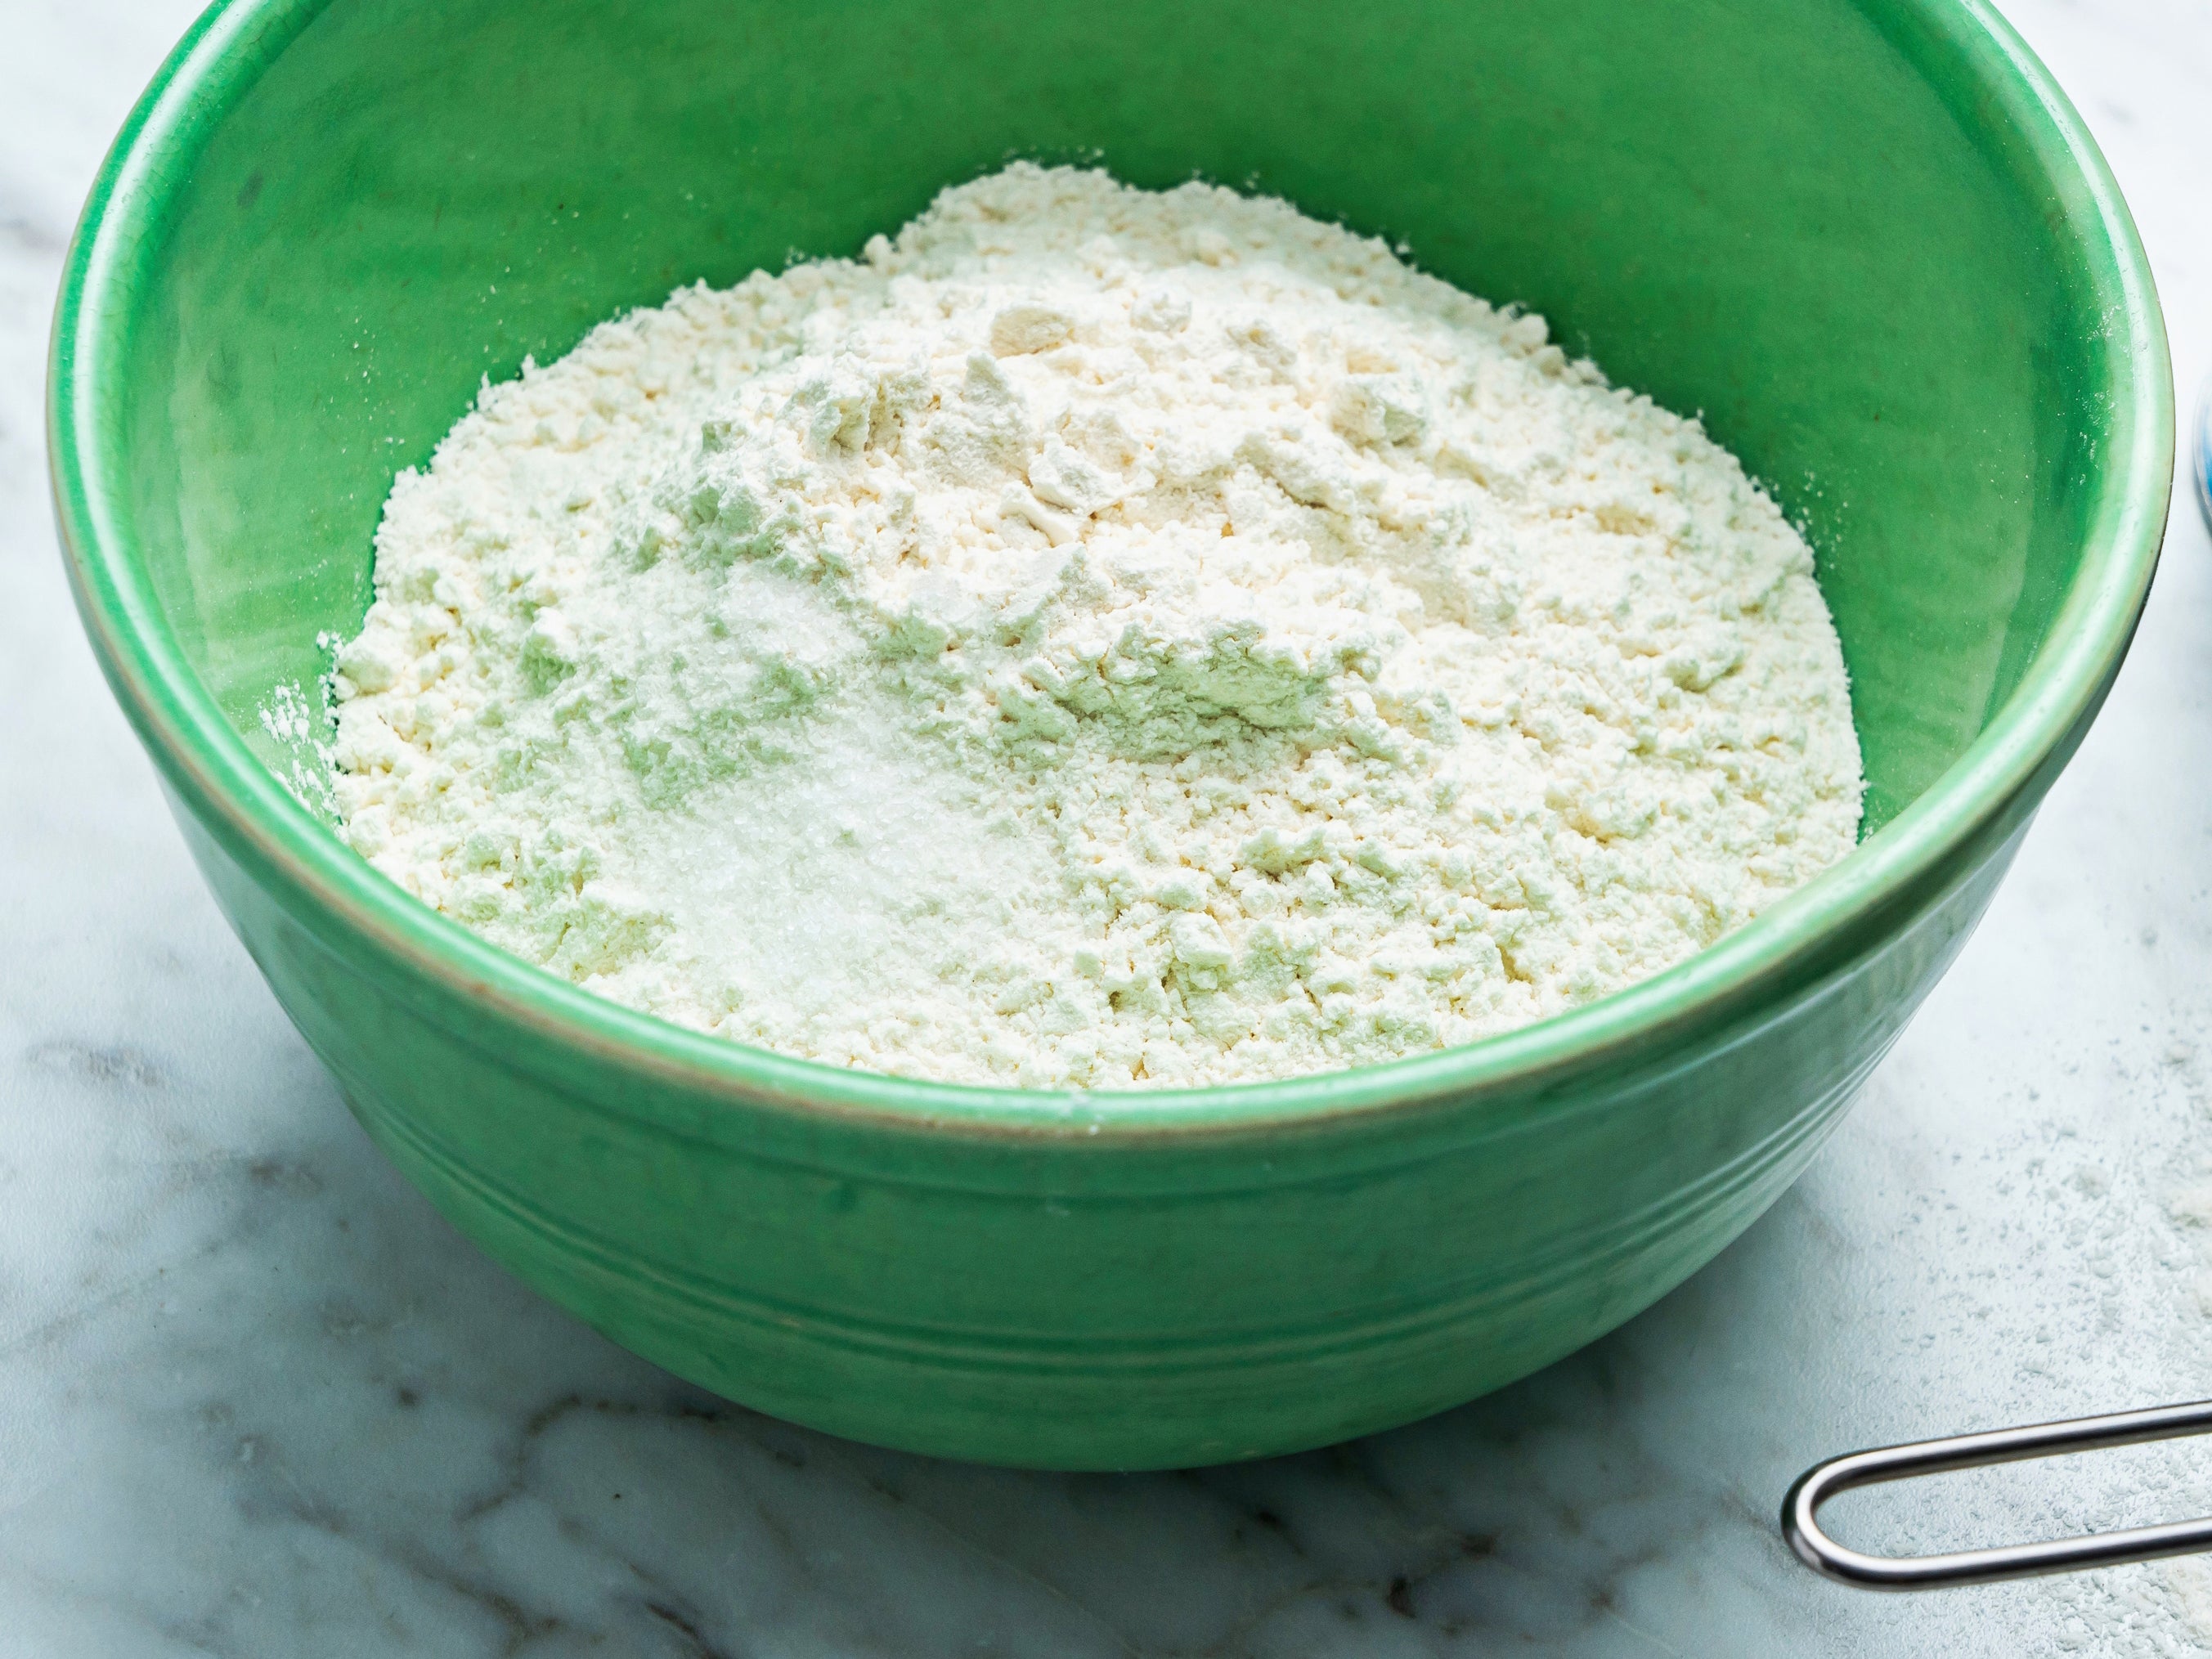 Self-rising flour can be whipped up easily at home